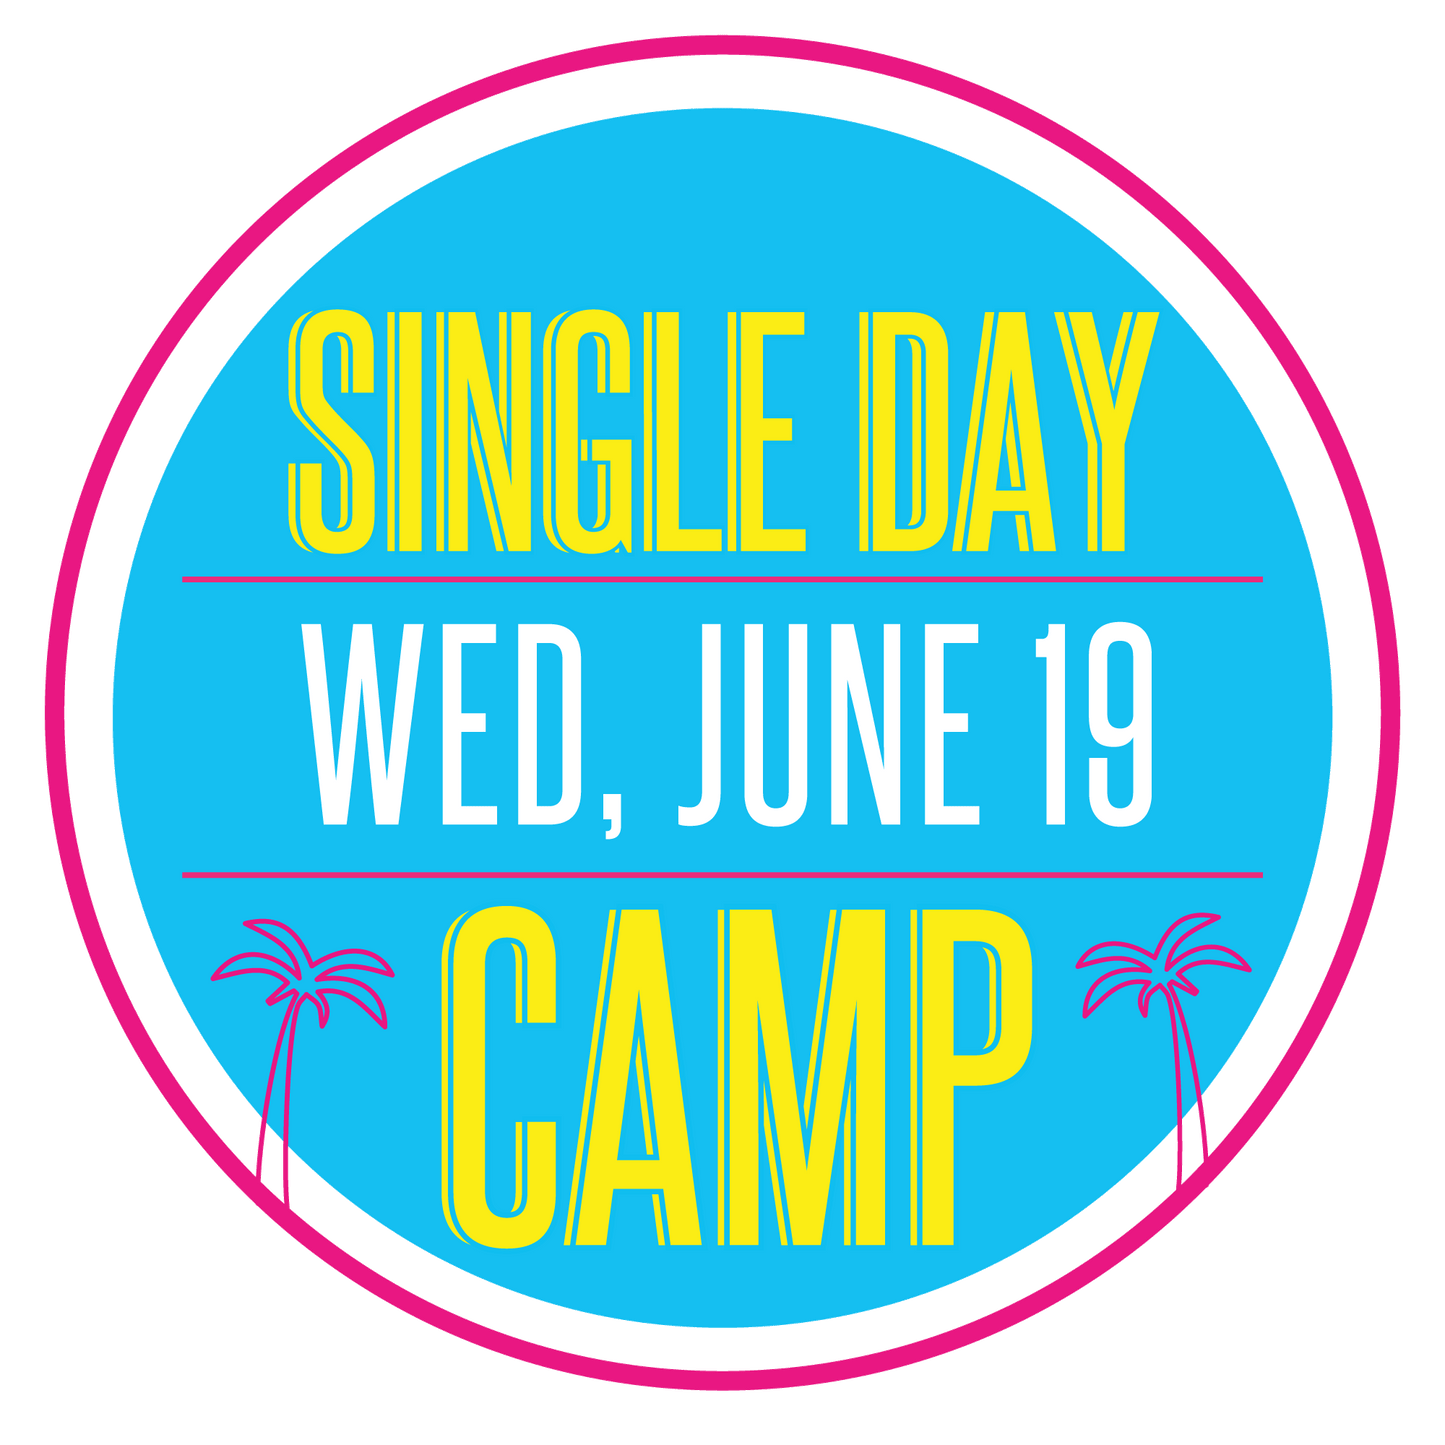 Single Day Sewing Workshop: Wednesday, June 19, 9am-3pm